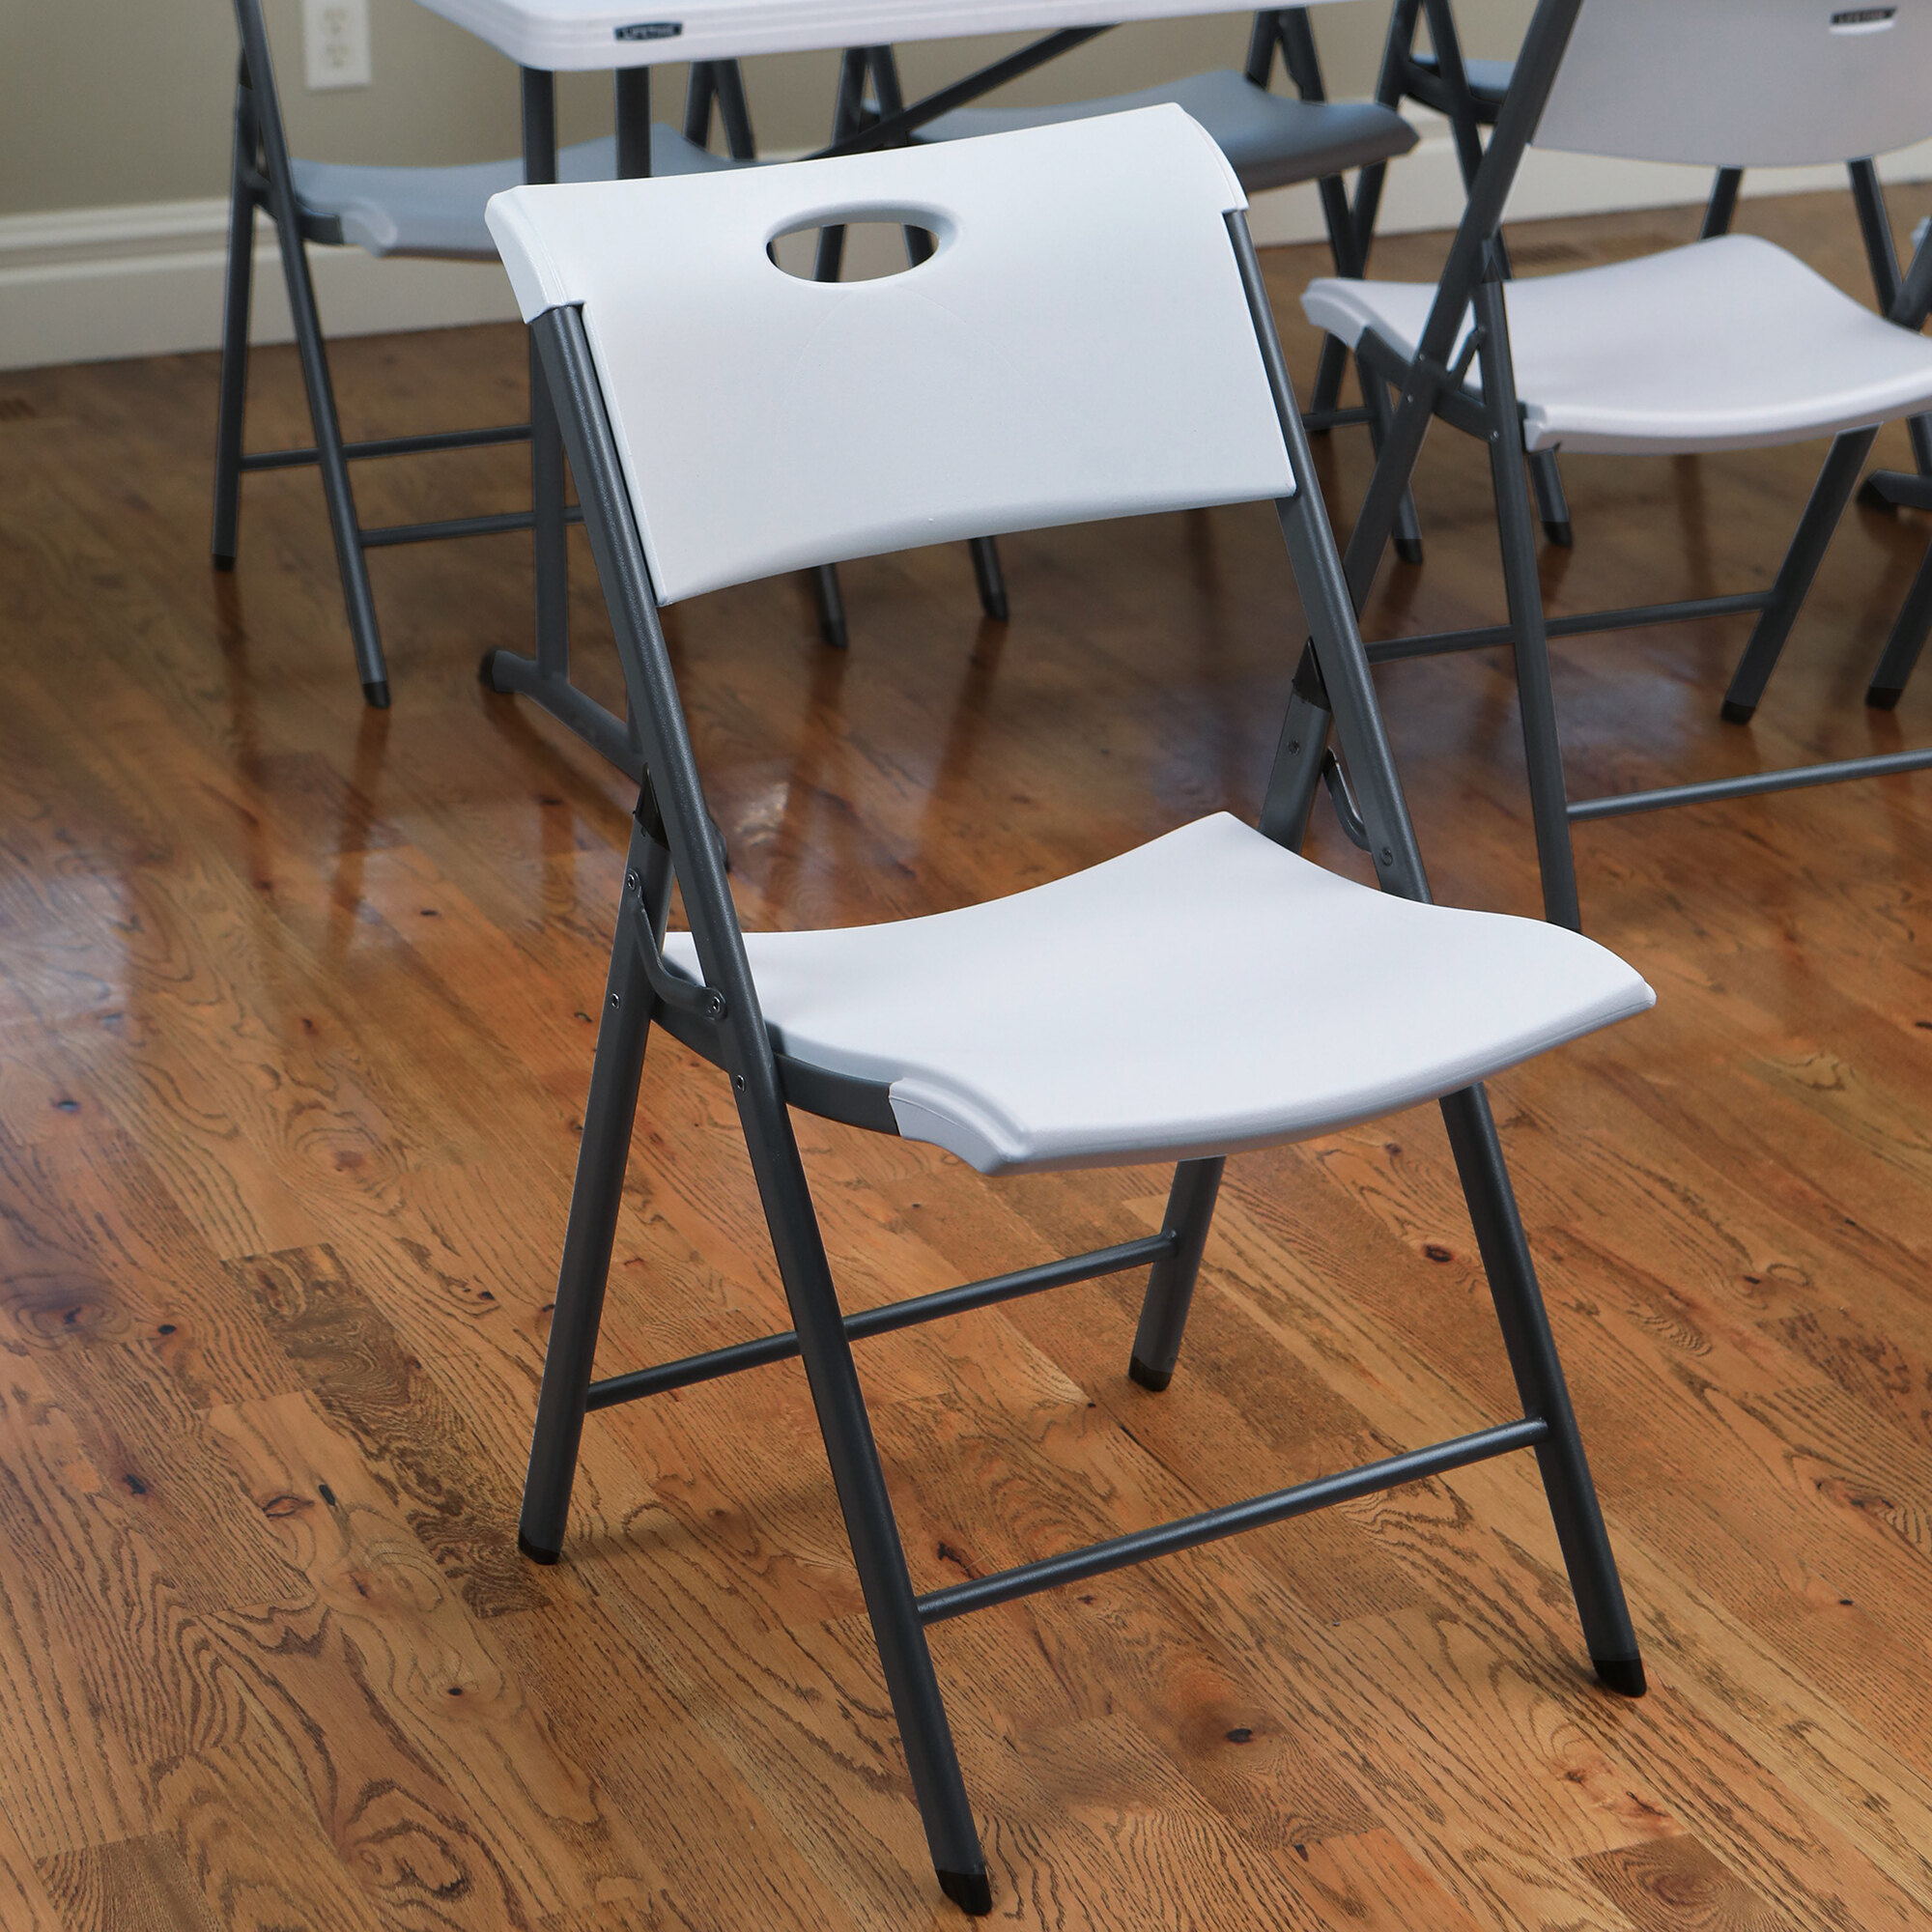 Lifetime 80643 White Folding Chair with Carrying Handle - 4/Pack